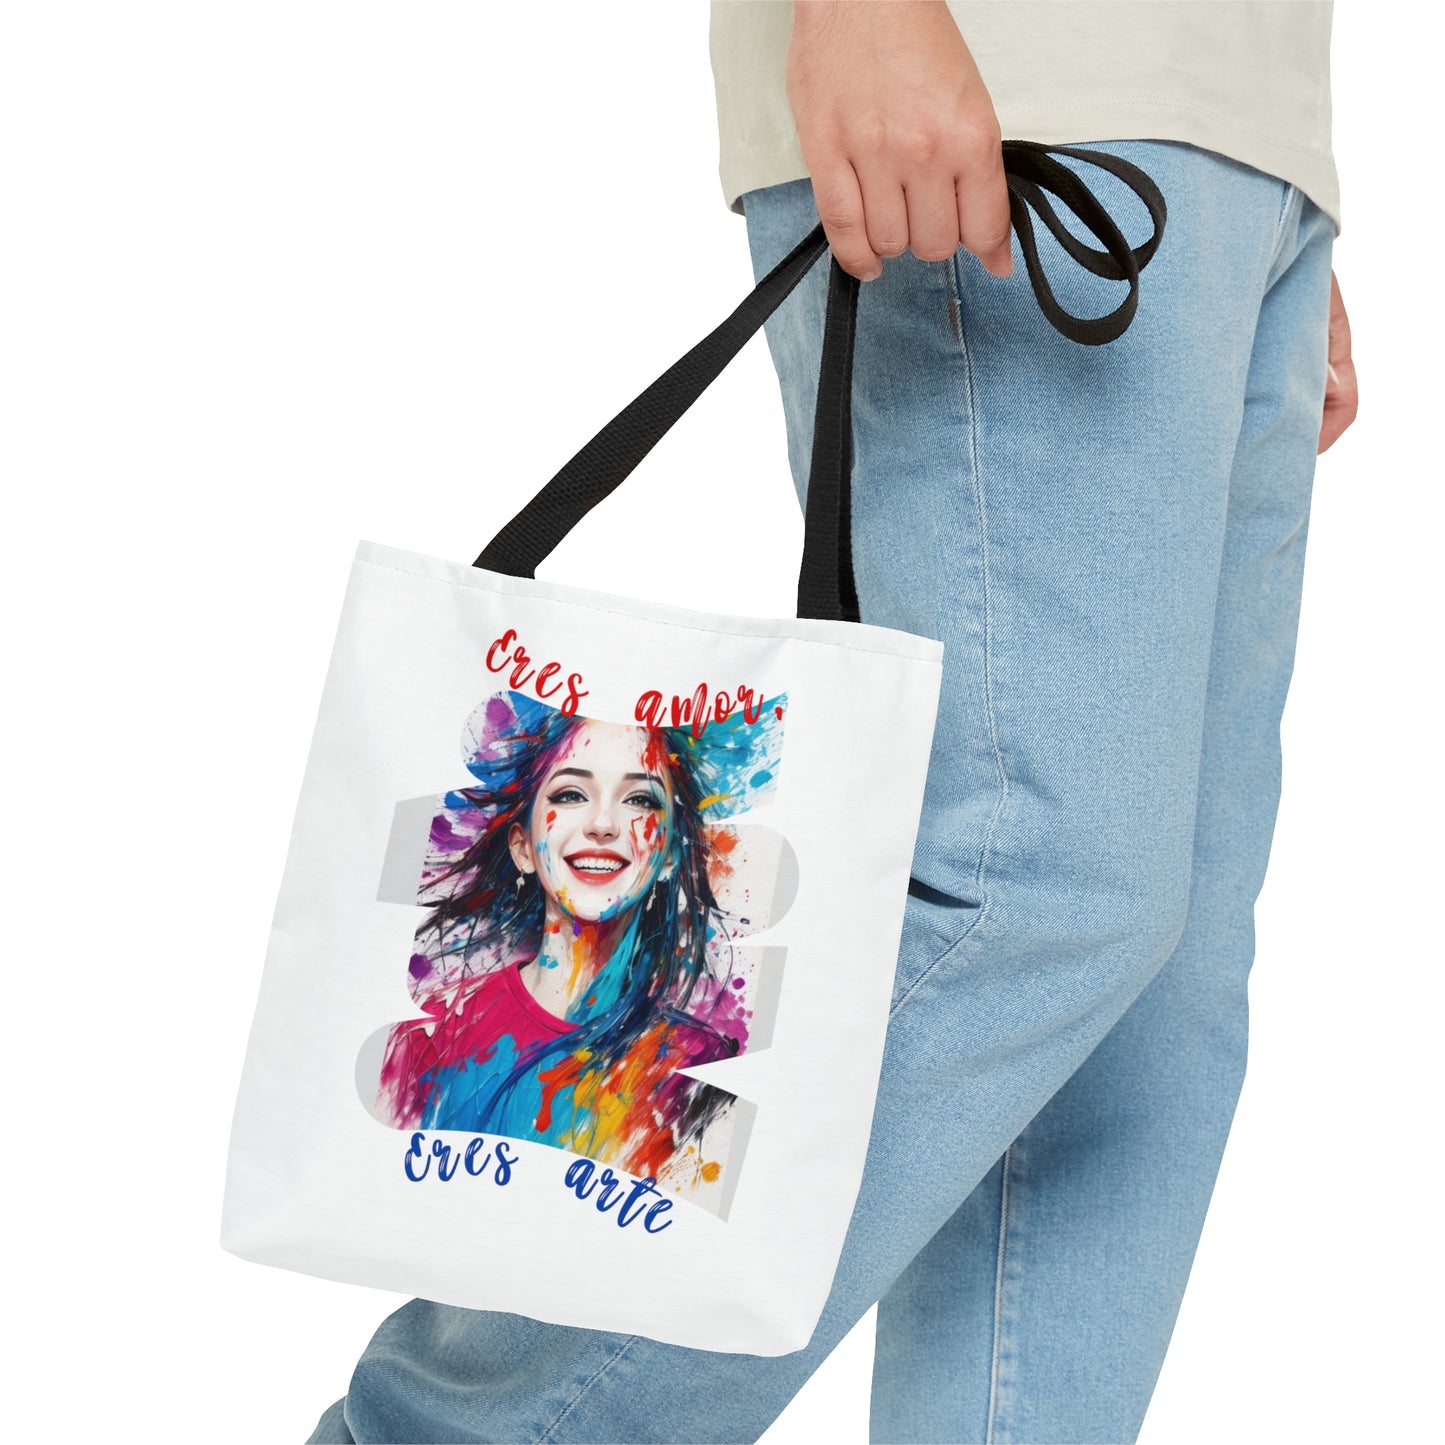 Tote Bag - Love and freedom - 05